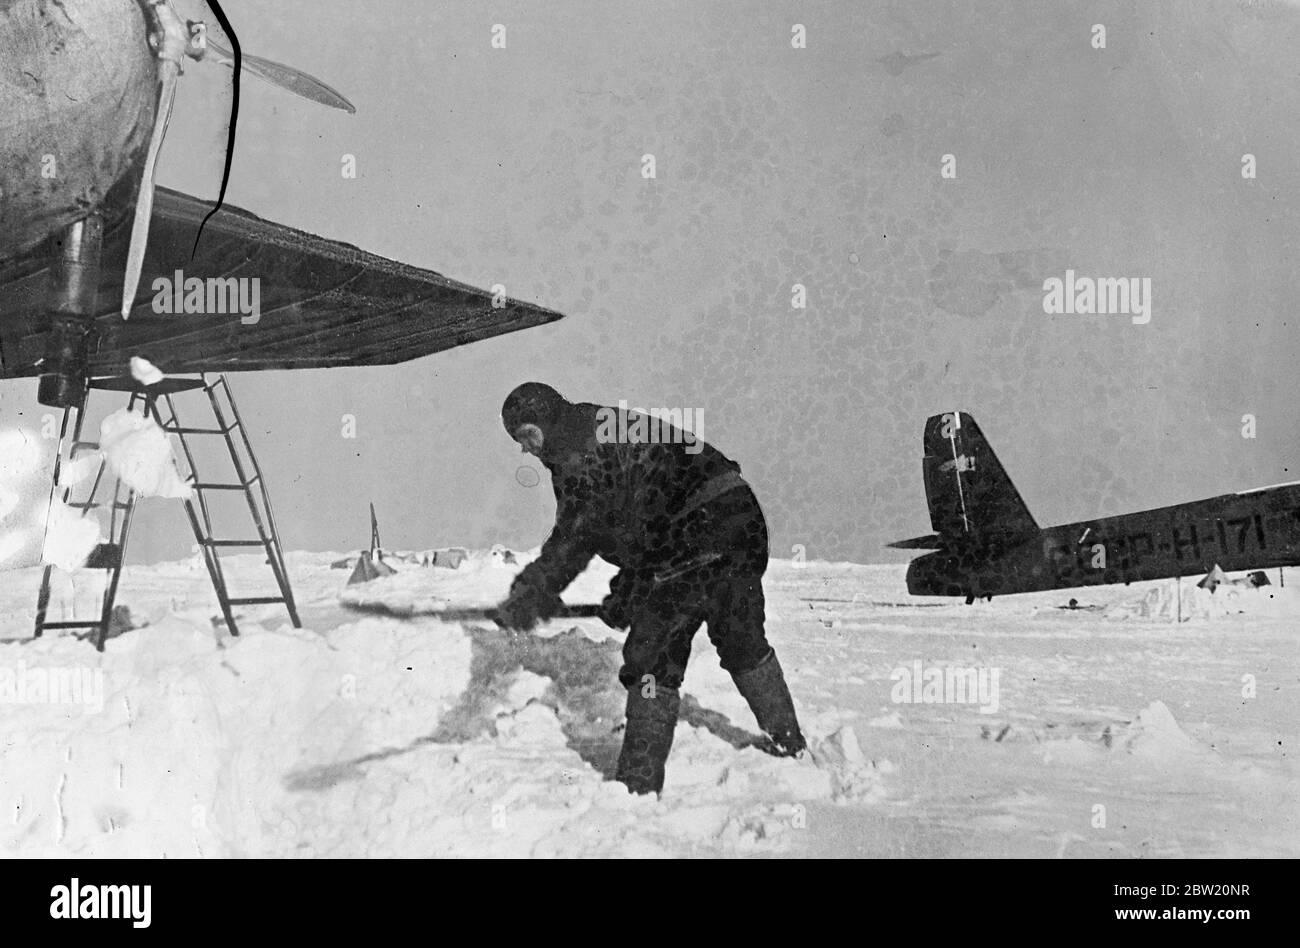 These pictures, from the North Pole, were flown to Moscow and from there to London. The Soviet scientific expedition led by Professor Otto Schmidt successfully established a scientific village on an ice floe in the frozen wilderness from which valuable scientific information and regular weather reports are now being sent by radio for the first time in history. M. Vodopyanov pilot of the expedition, cleaning snow from the floe in front of his plane. 30 June 1937 Stock Photo